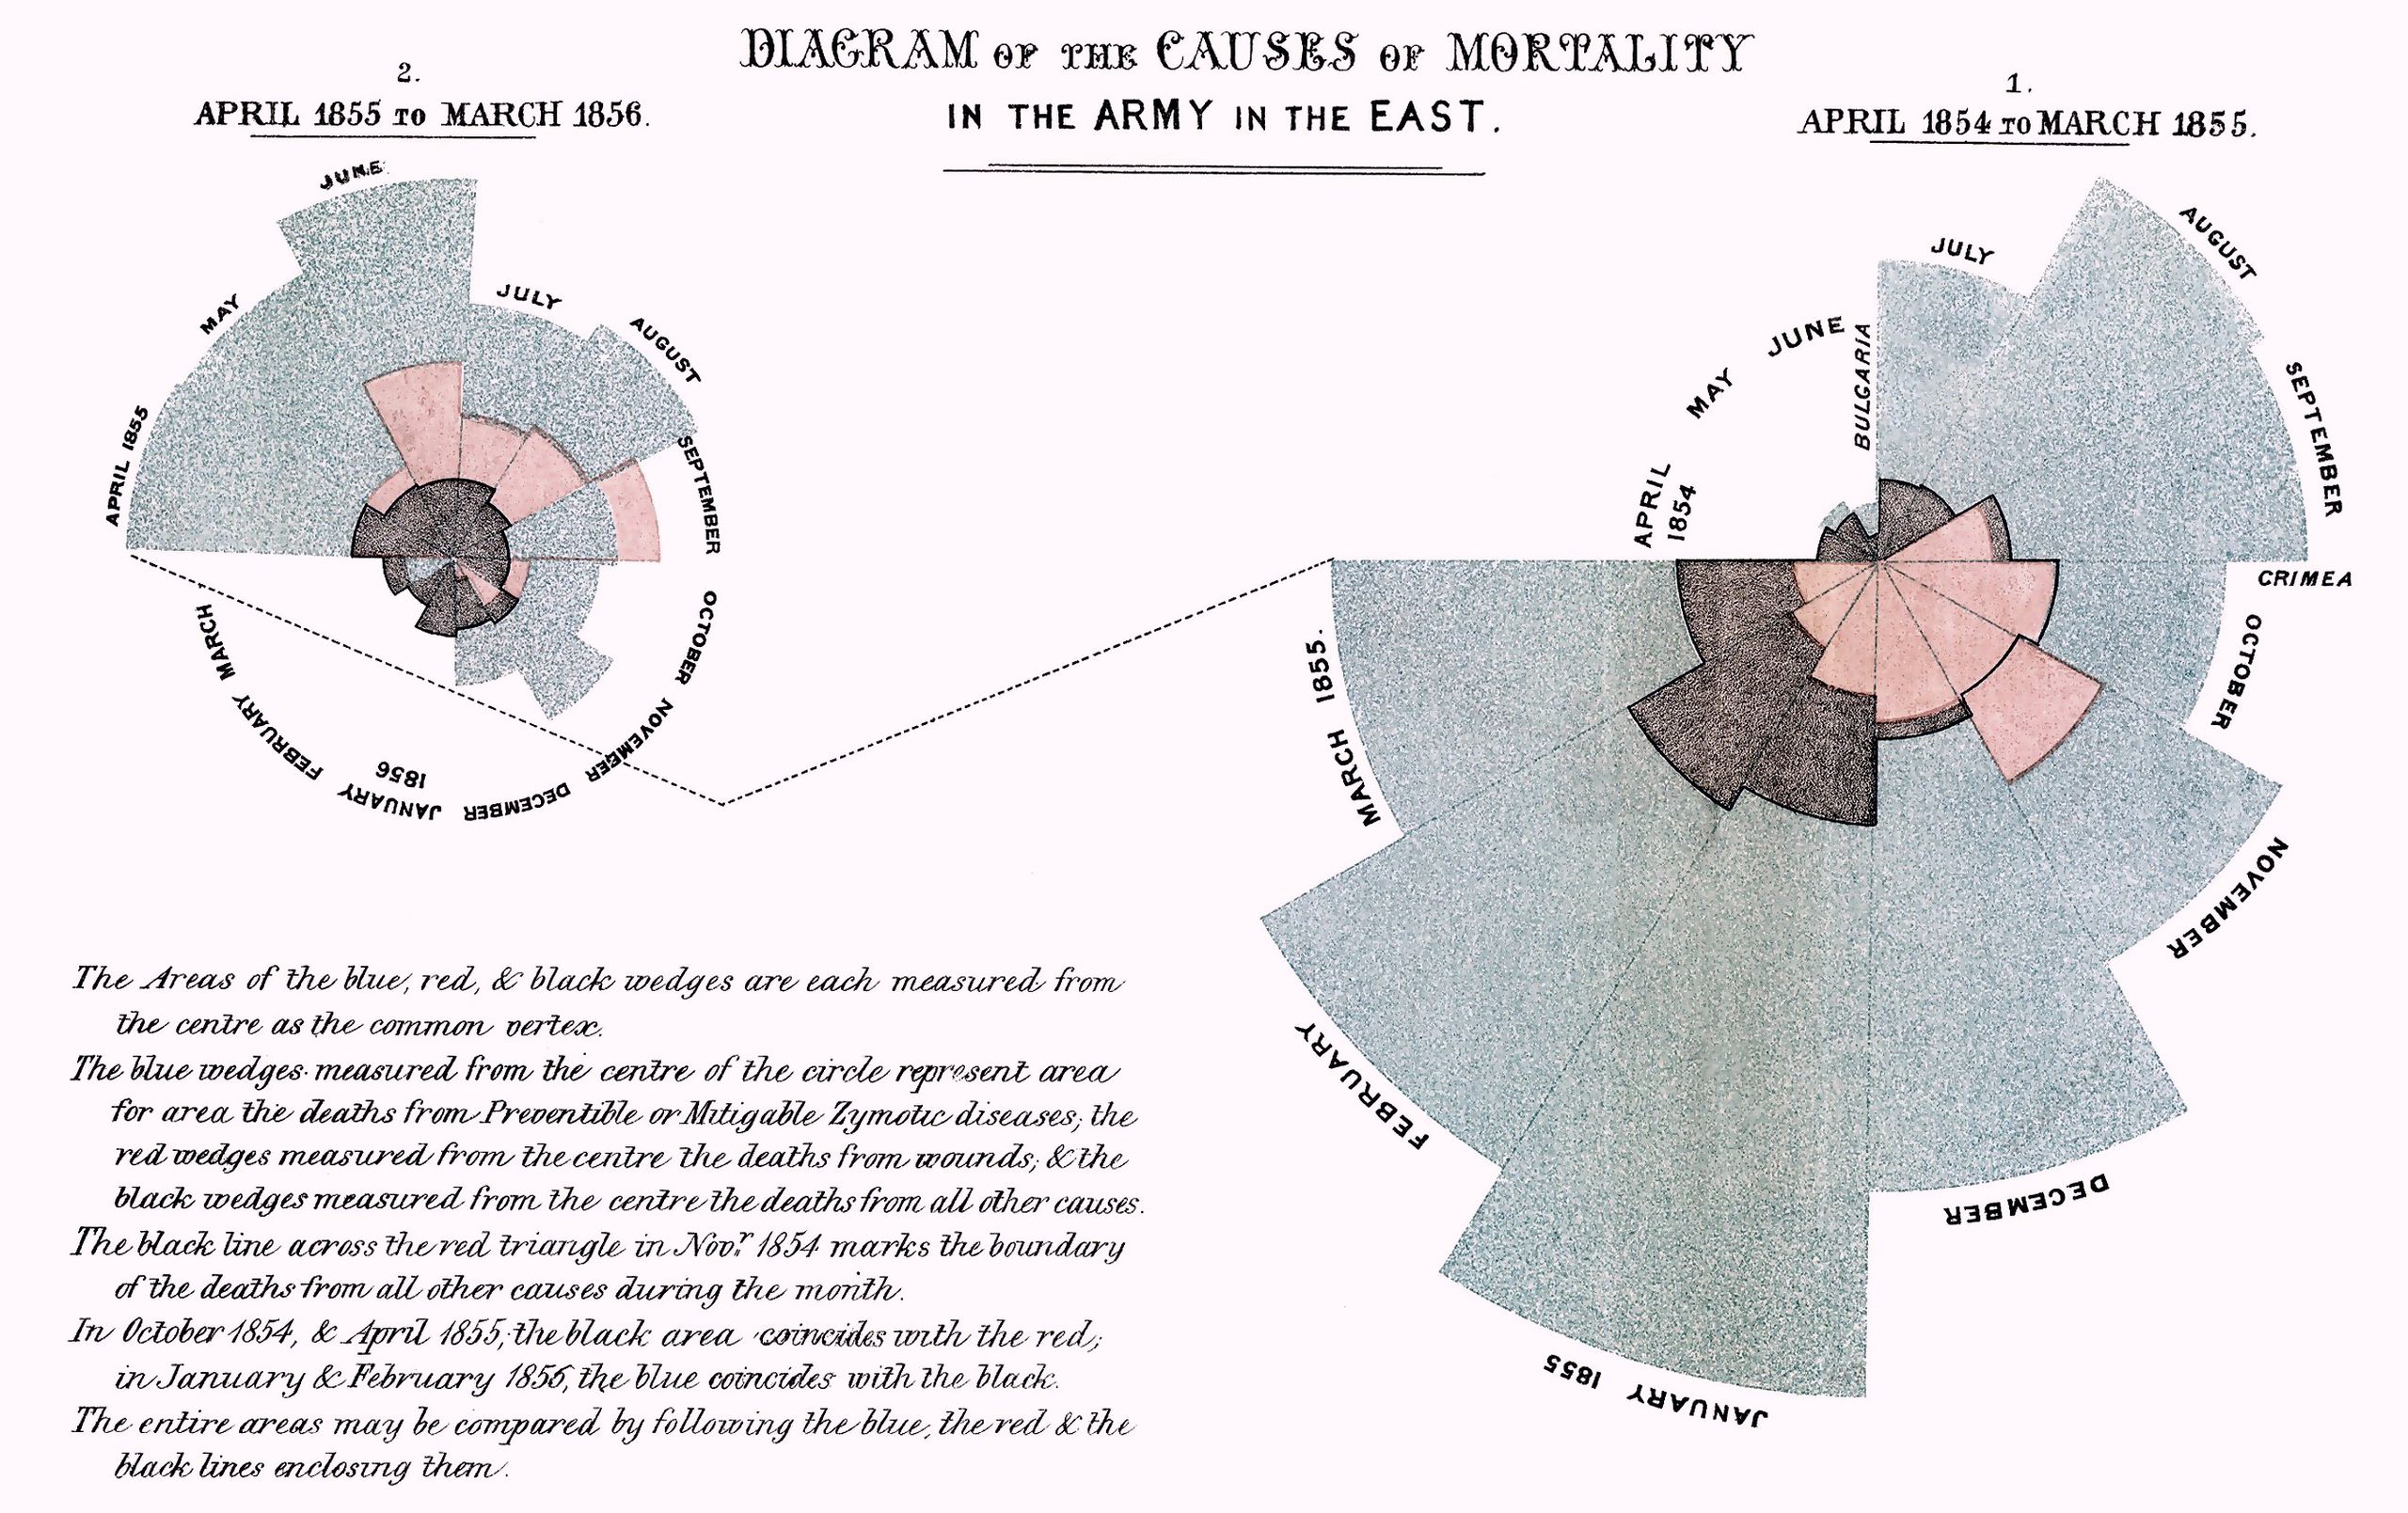 Polar-area-diagram-by-Florence-Nightingale-illustrating-causes-of-mortality-during-the-Crimean-War-1857.